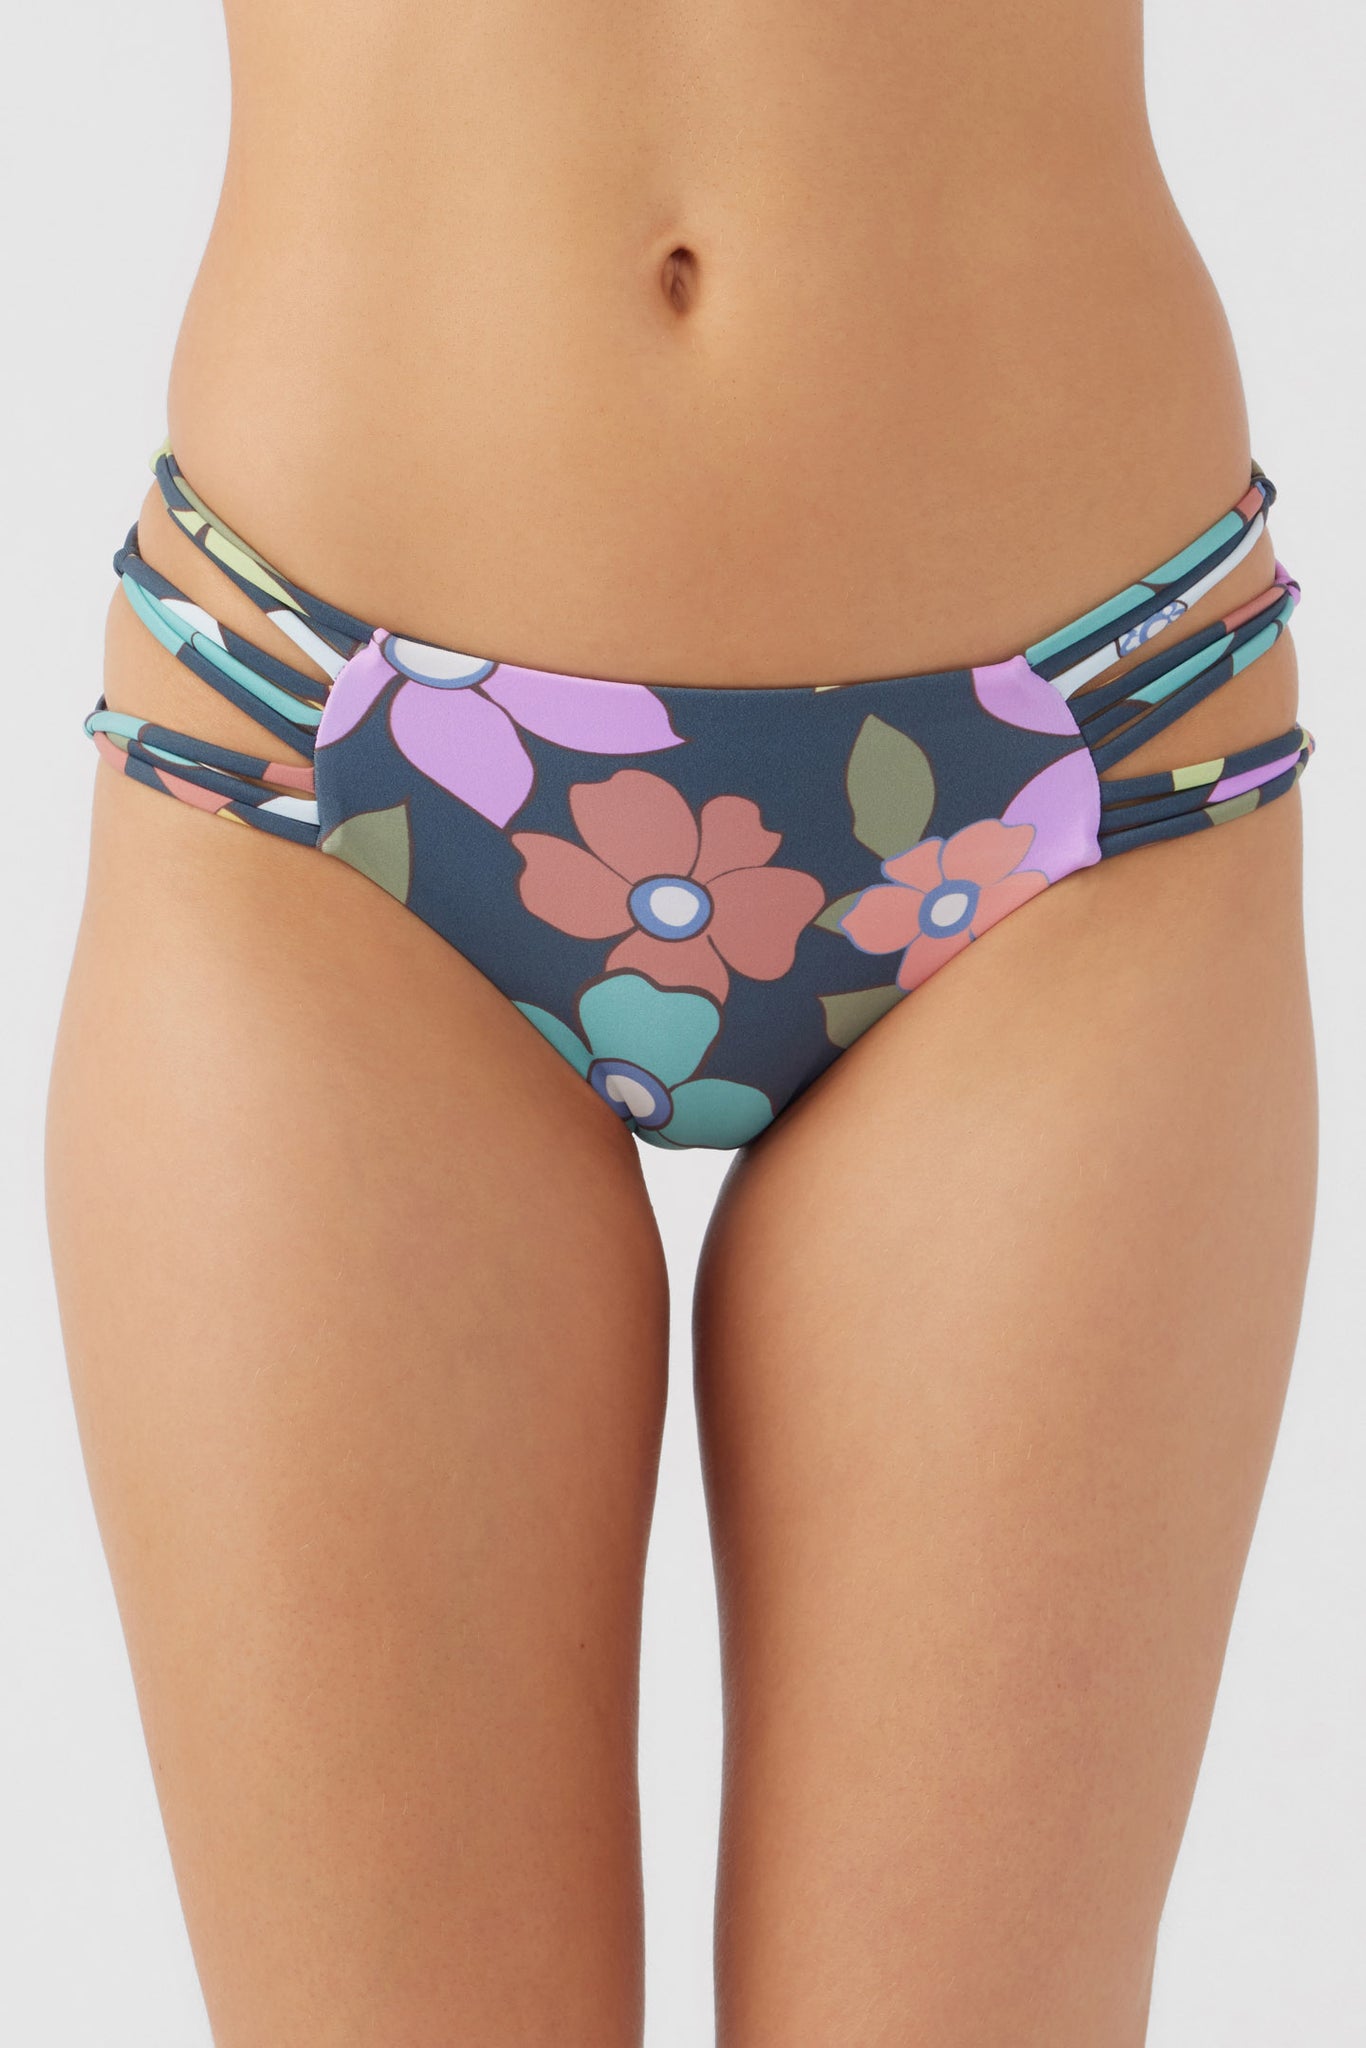 LAYLA FLORAL BOULDERS MID-RISE FULL BOTTOMS